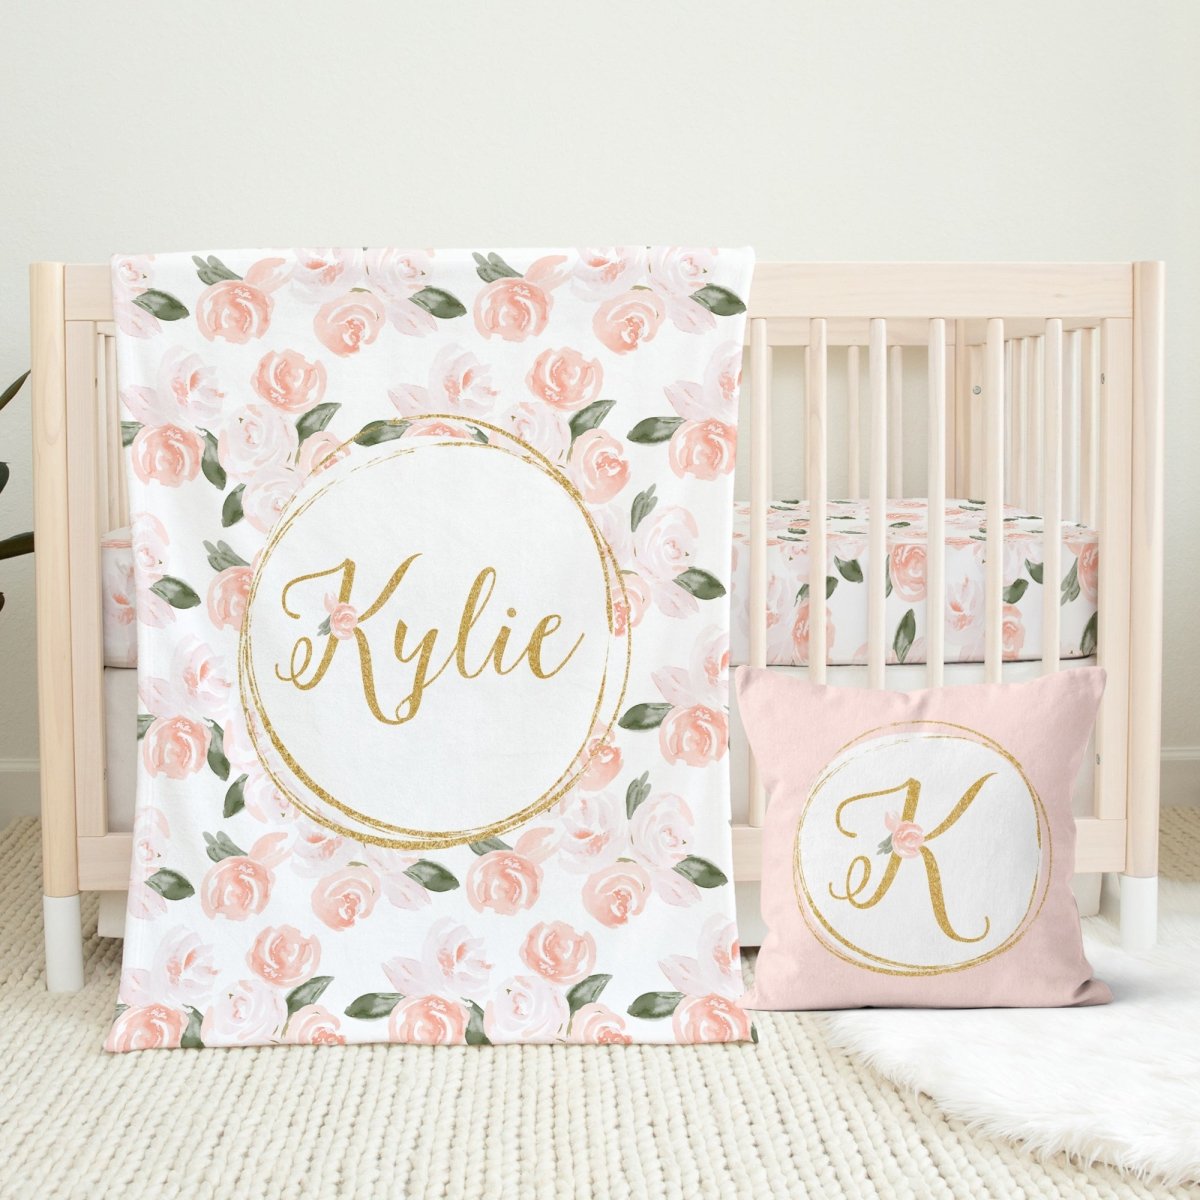 Watercolor Floral Personalized Minky Blanket - gender_girl, Personalized_Yes, text